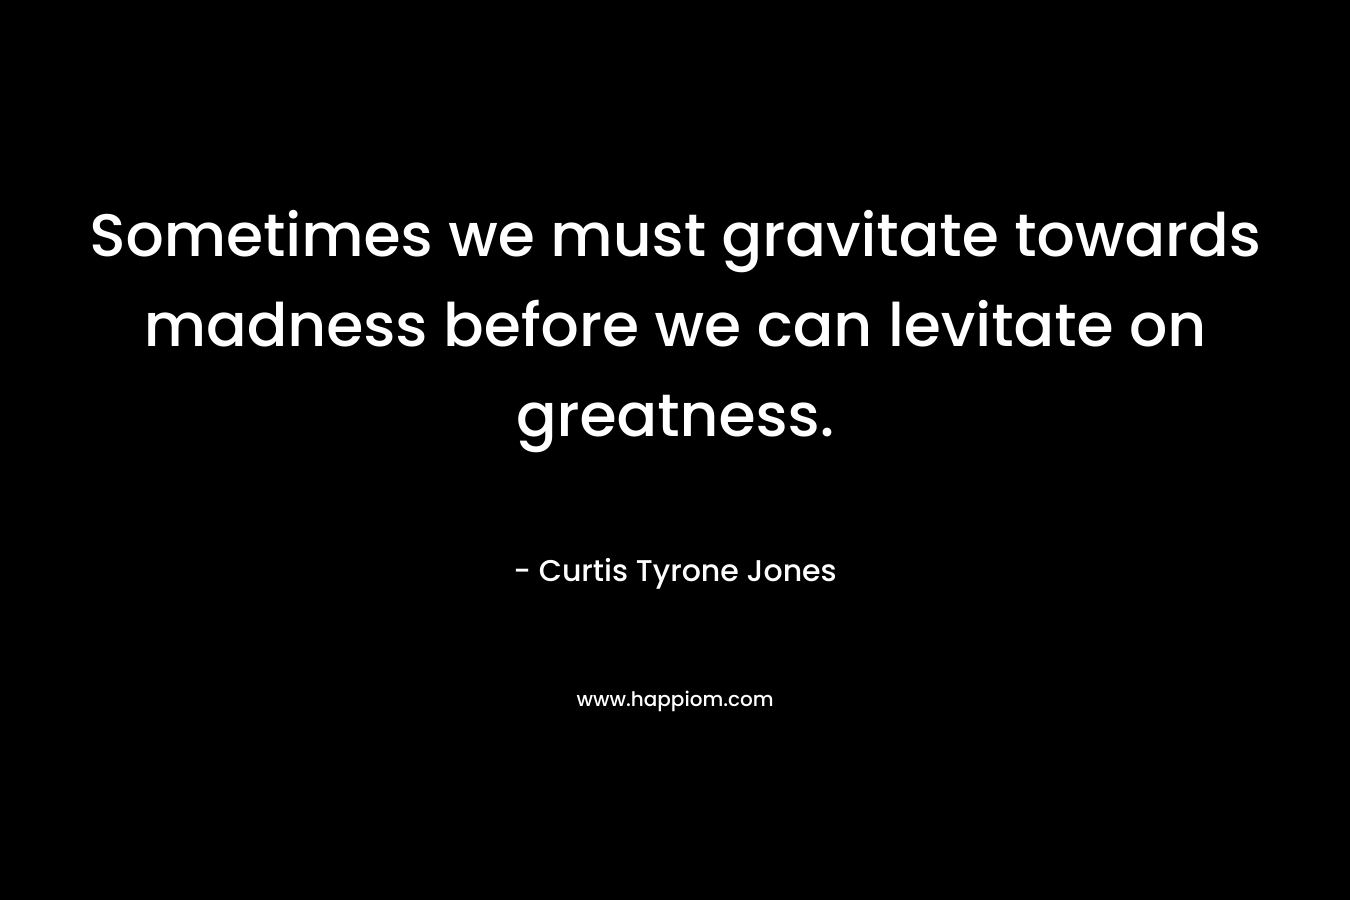 Sometimes we must gravitate towards madness before we can levitate on greatness.